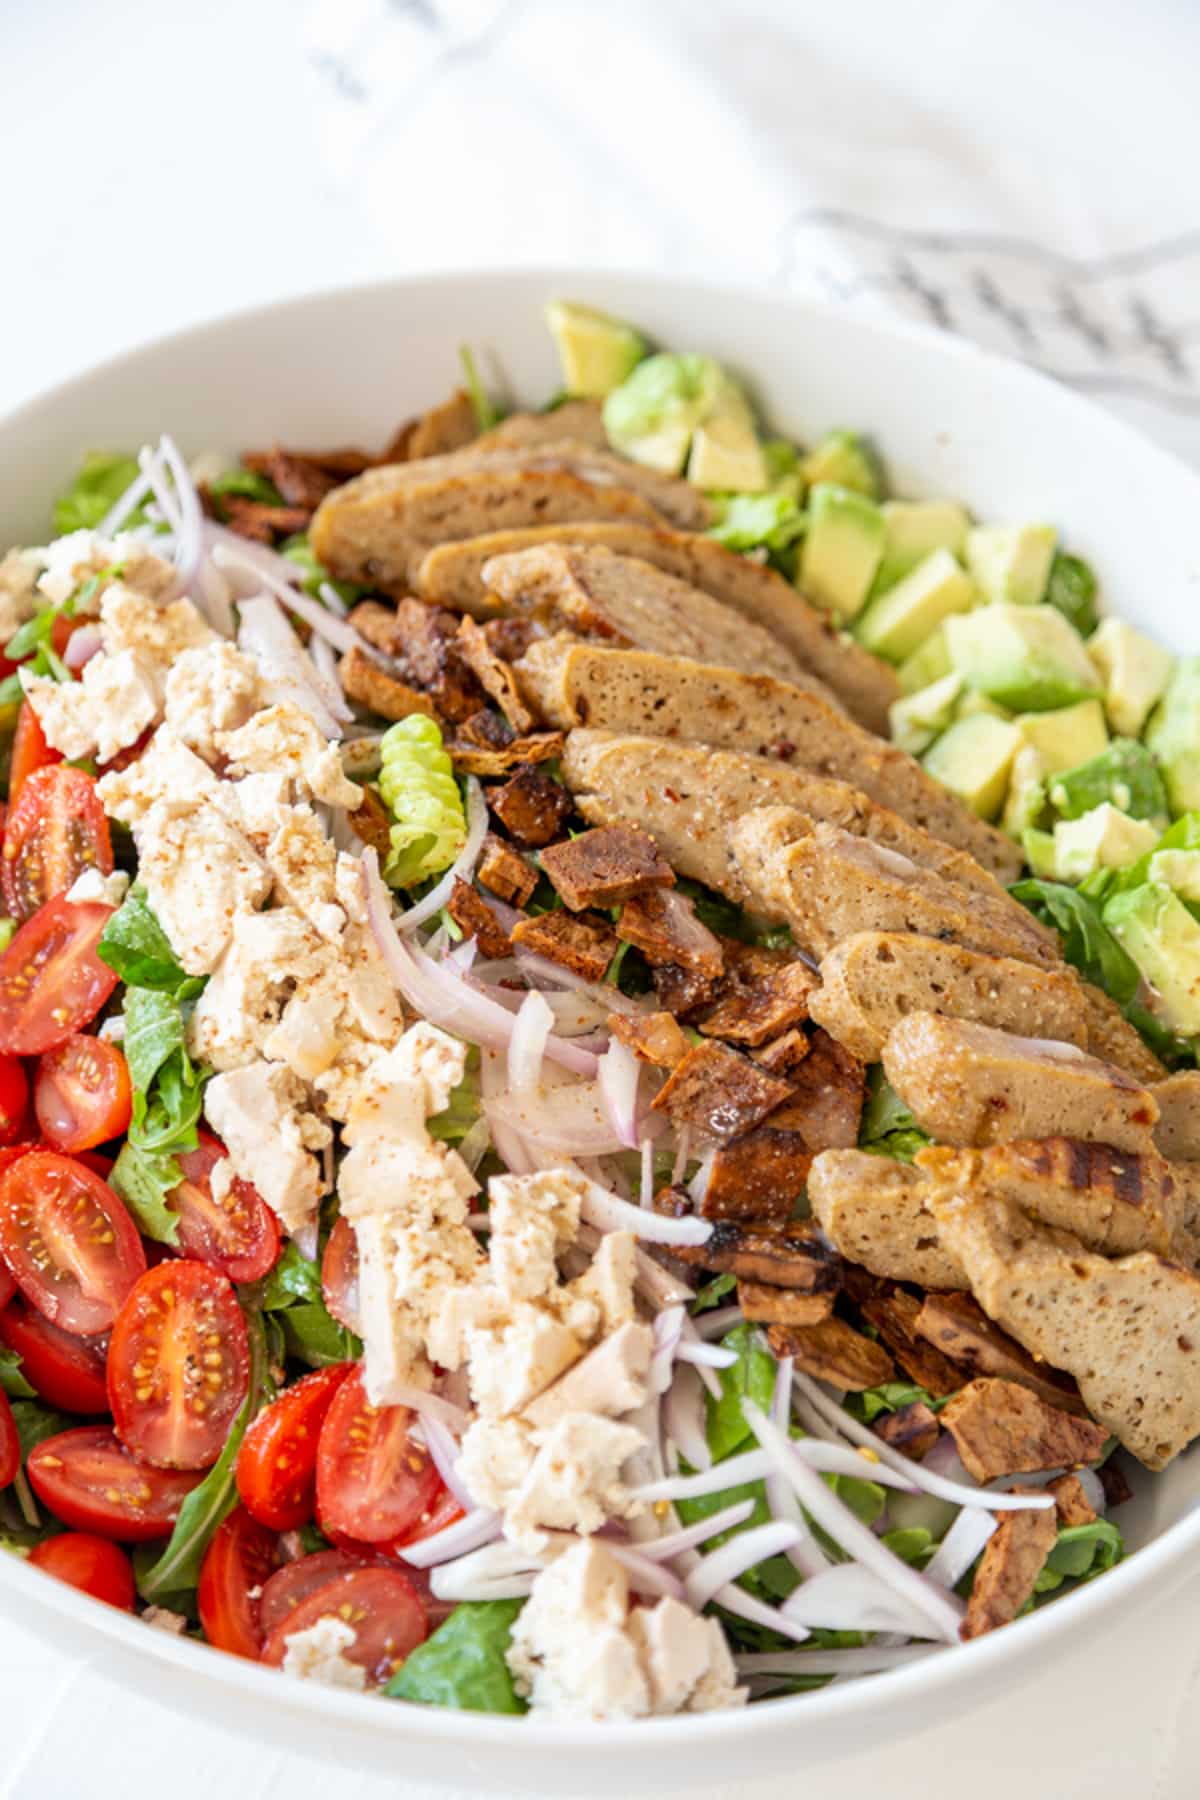 A Cobb salad with vegan chicken and bacon bits in a large white bowl.